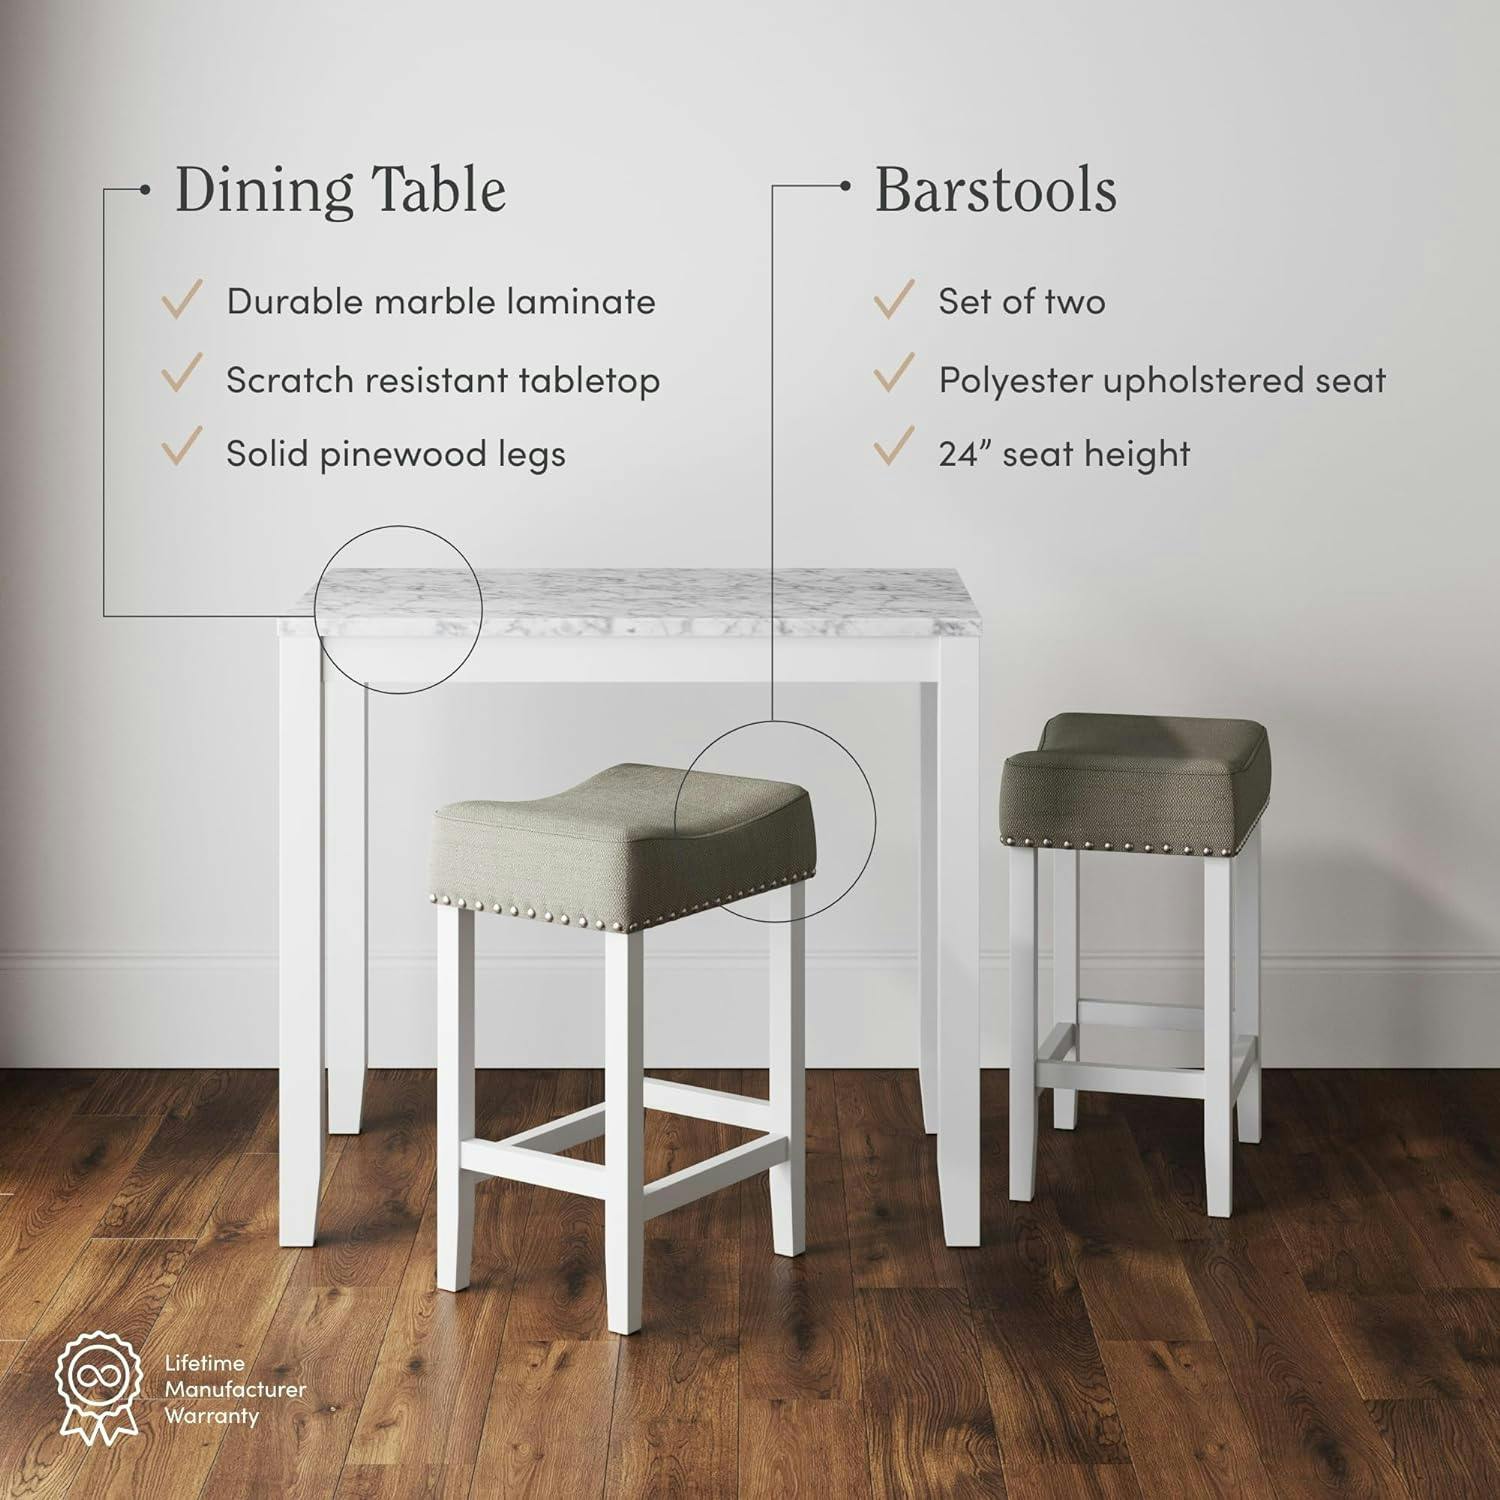 Elegant Marble-Top Bistro Dining Set with Light Gray Fabric Chairs